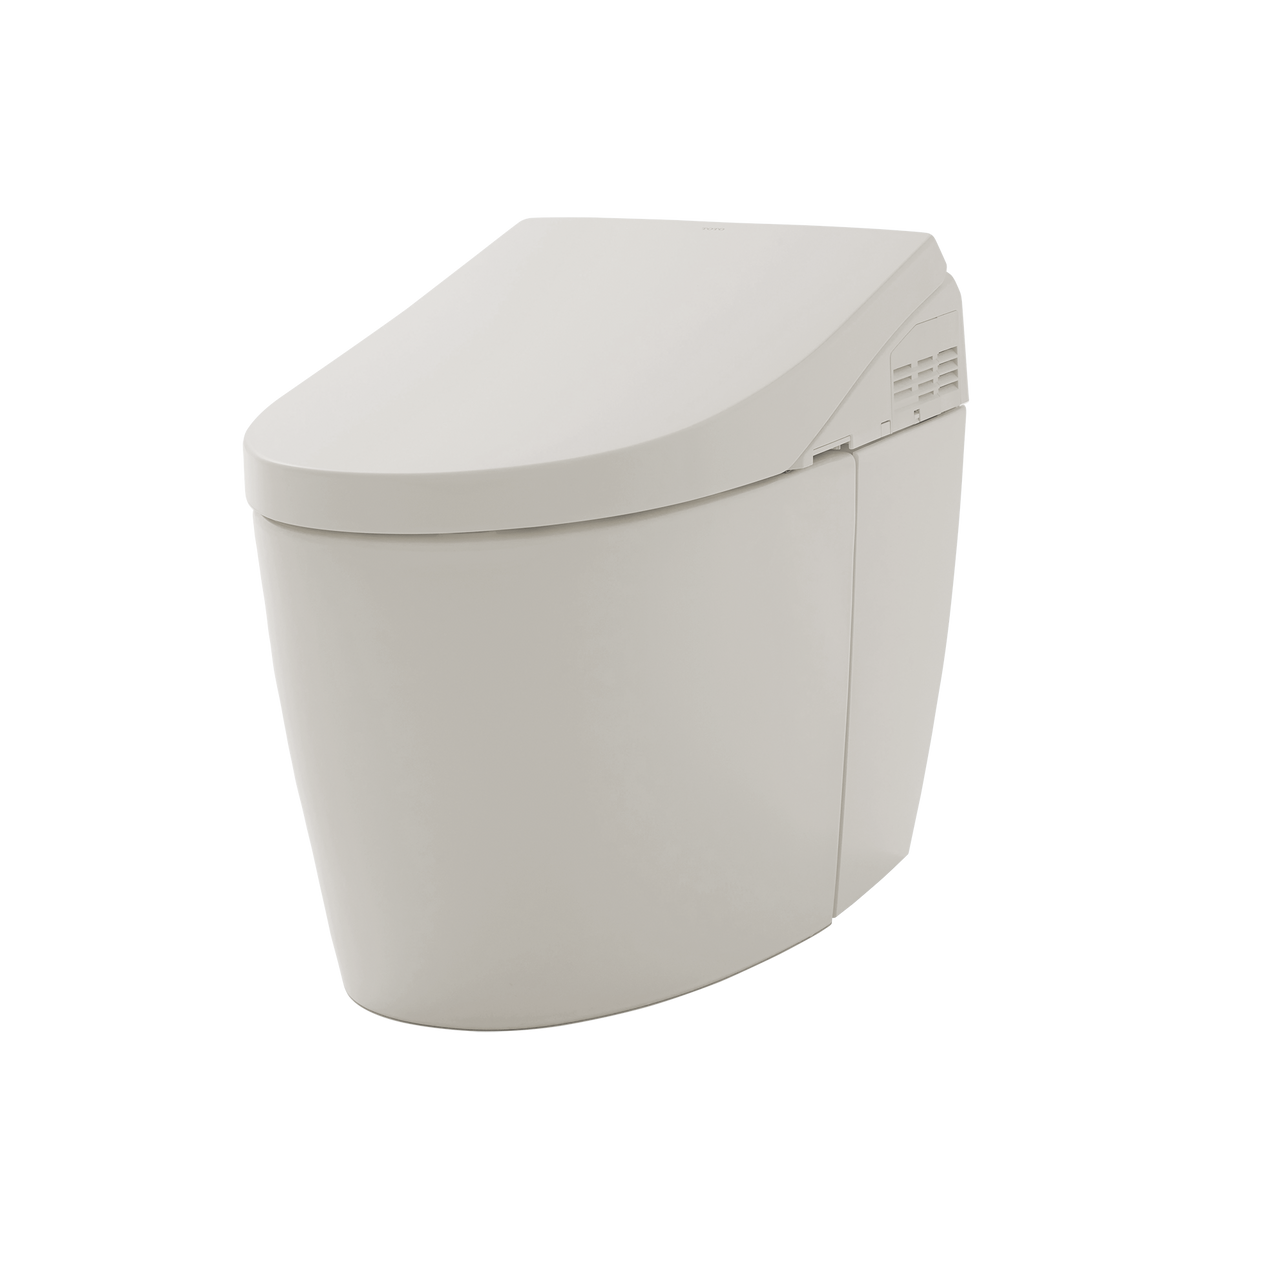 NEOREST AH Dual Flush 1.0 or 0.8 GPF Toilet with Intergeated Bidet Seat and EWATER+, - MS989CUMFG#12 - BNGBath